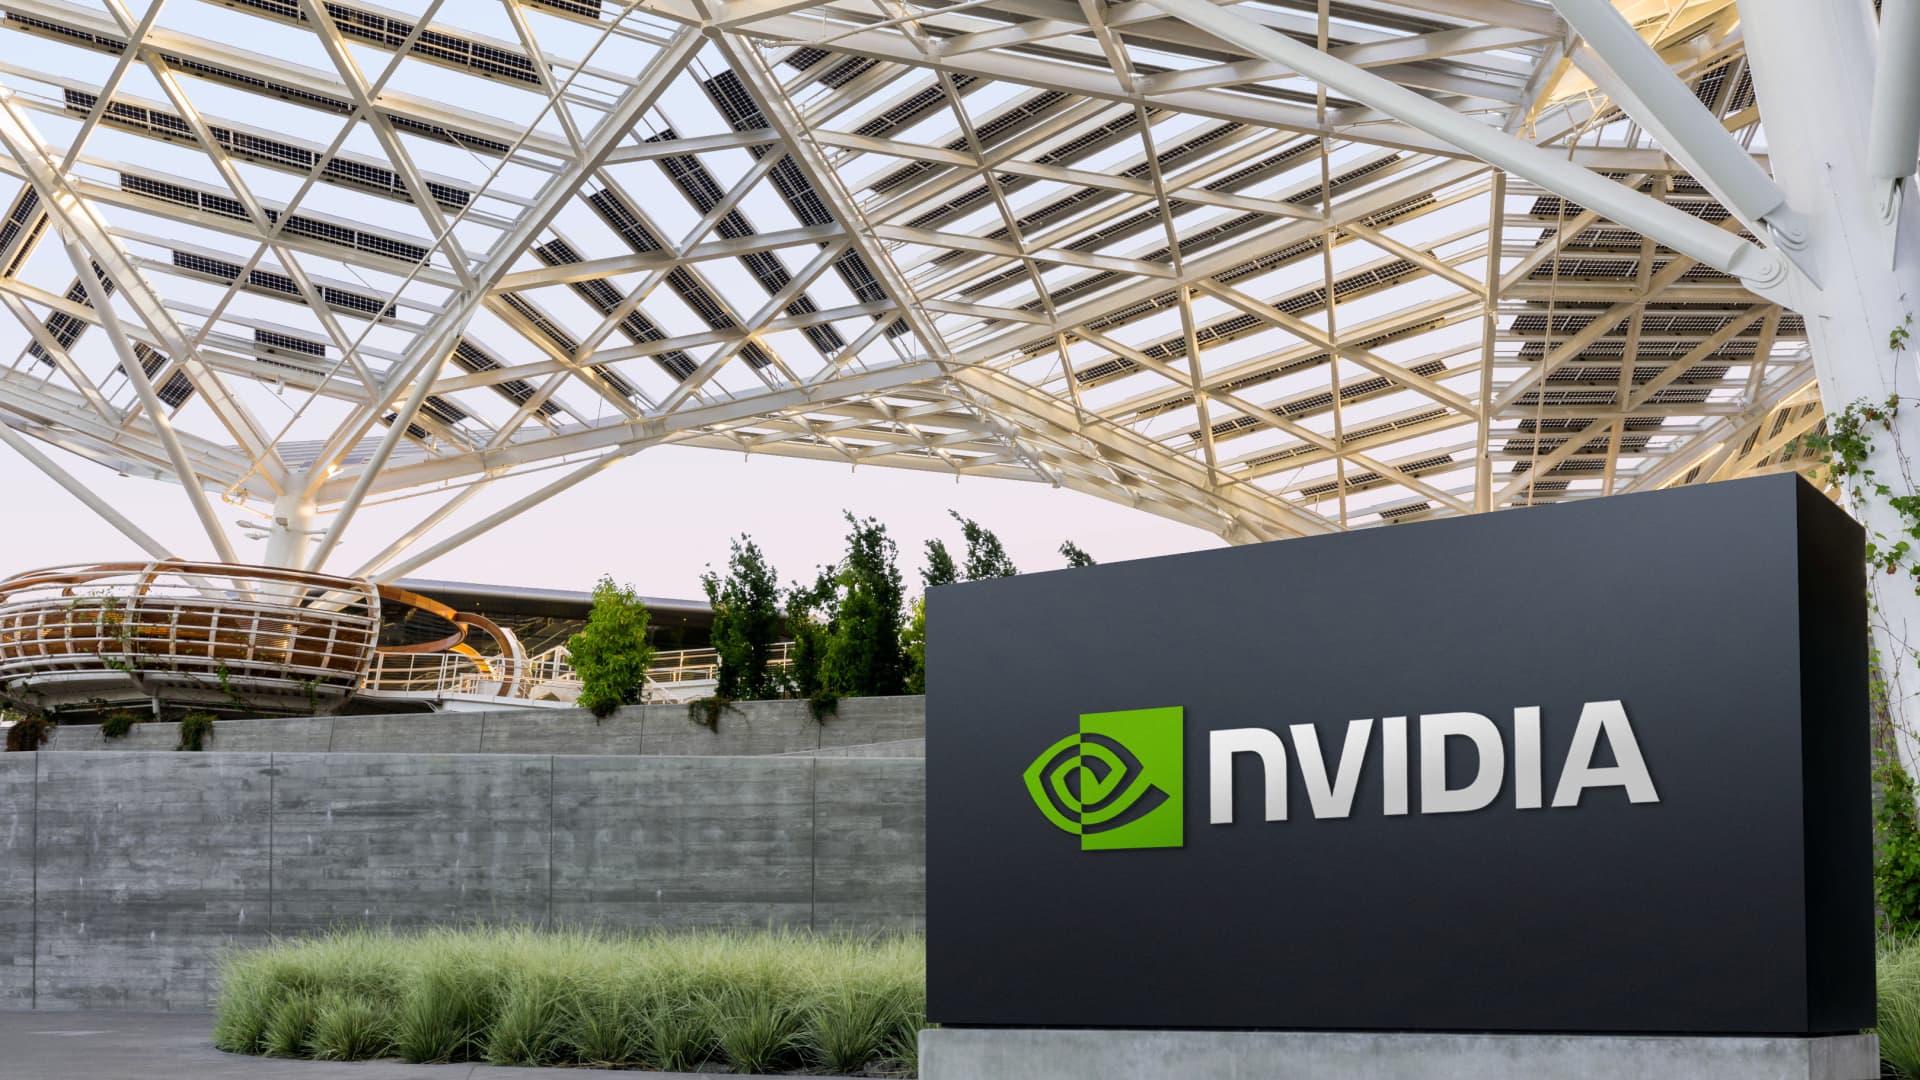 Stocks generating the biggest moves midday: Nvidia, Very first Republic, Nike, GameStop and additional